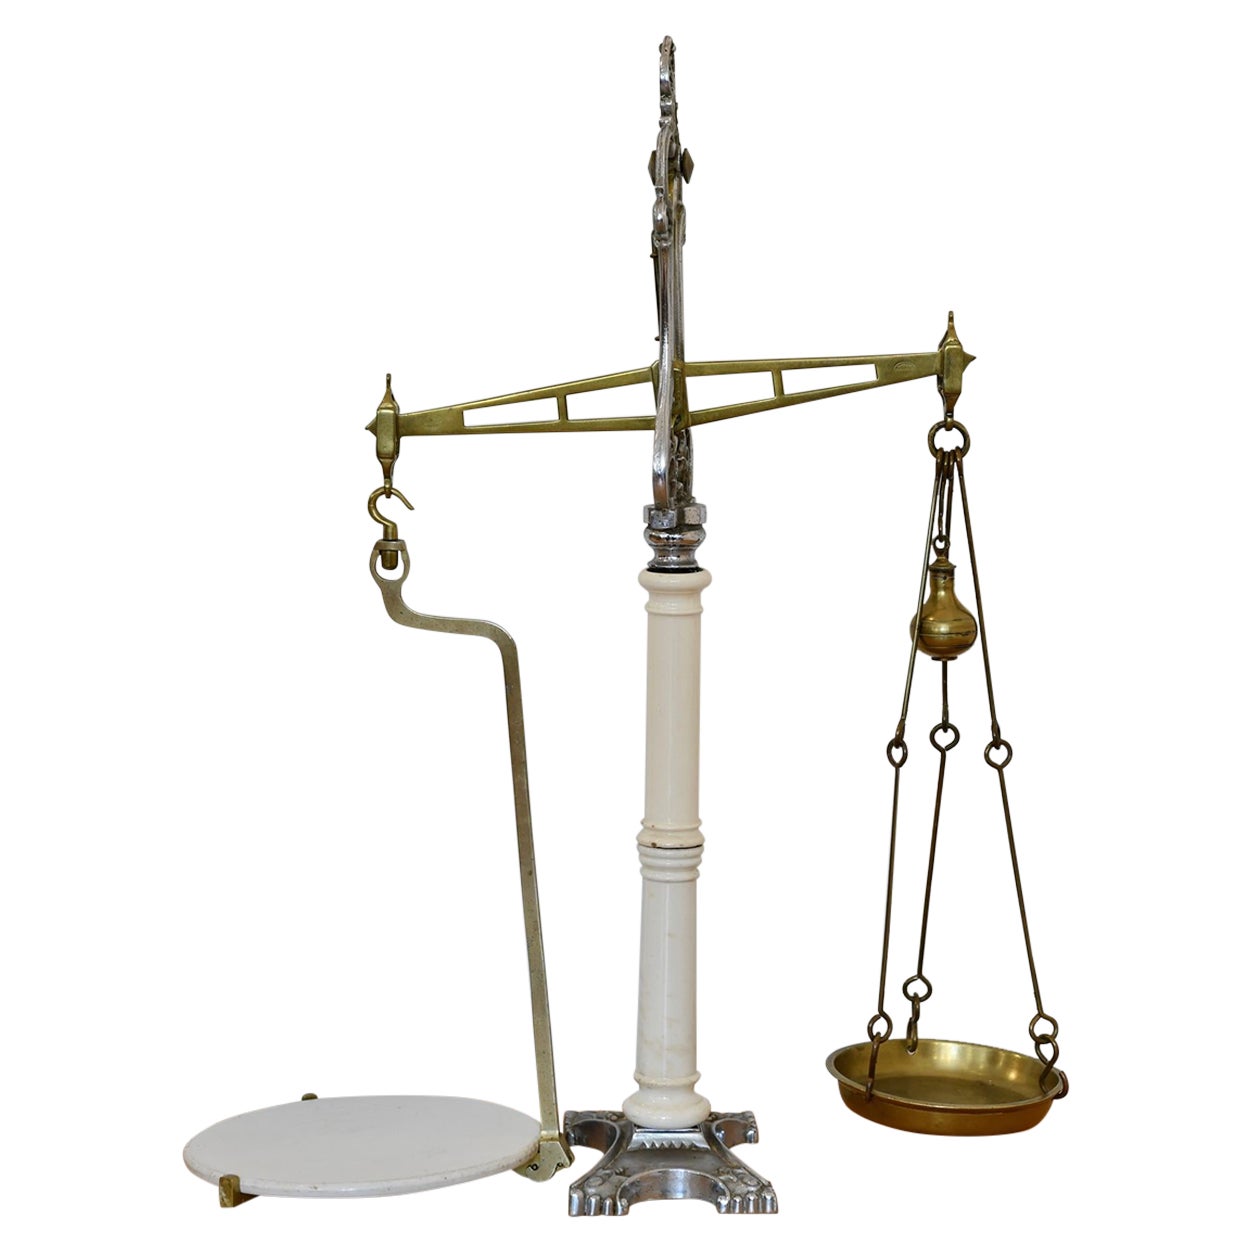 Victorian brass balance scale made by Hunt & Co, England